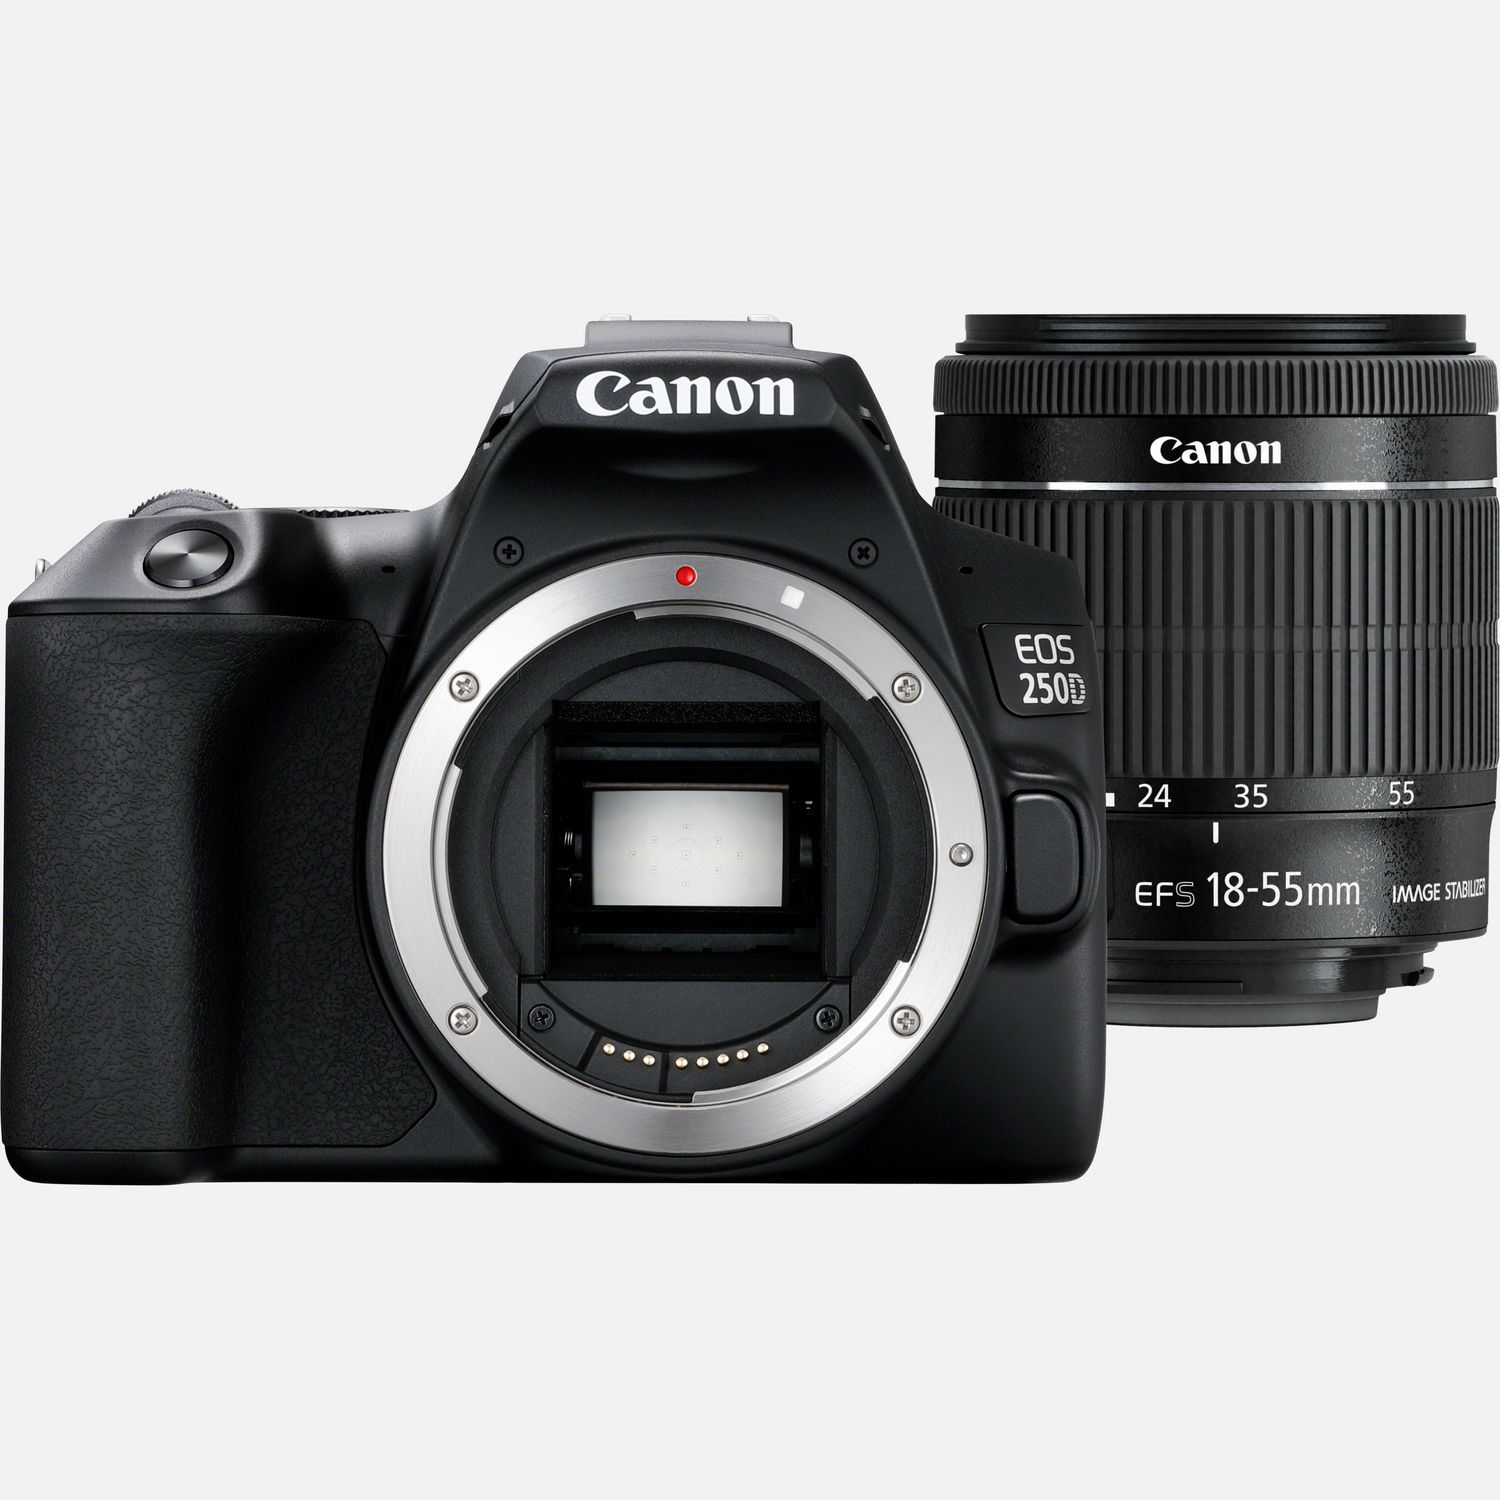 Buy Canon + 250D STM Store Black Cameras 18-55mm IS f/4-5.6 Lens EOS EF-S OY Body, Wi-Fi — in Canon